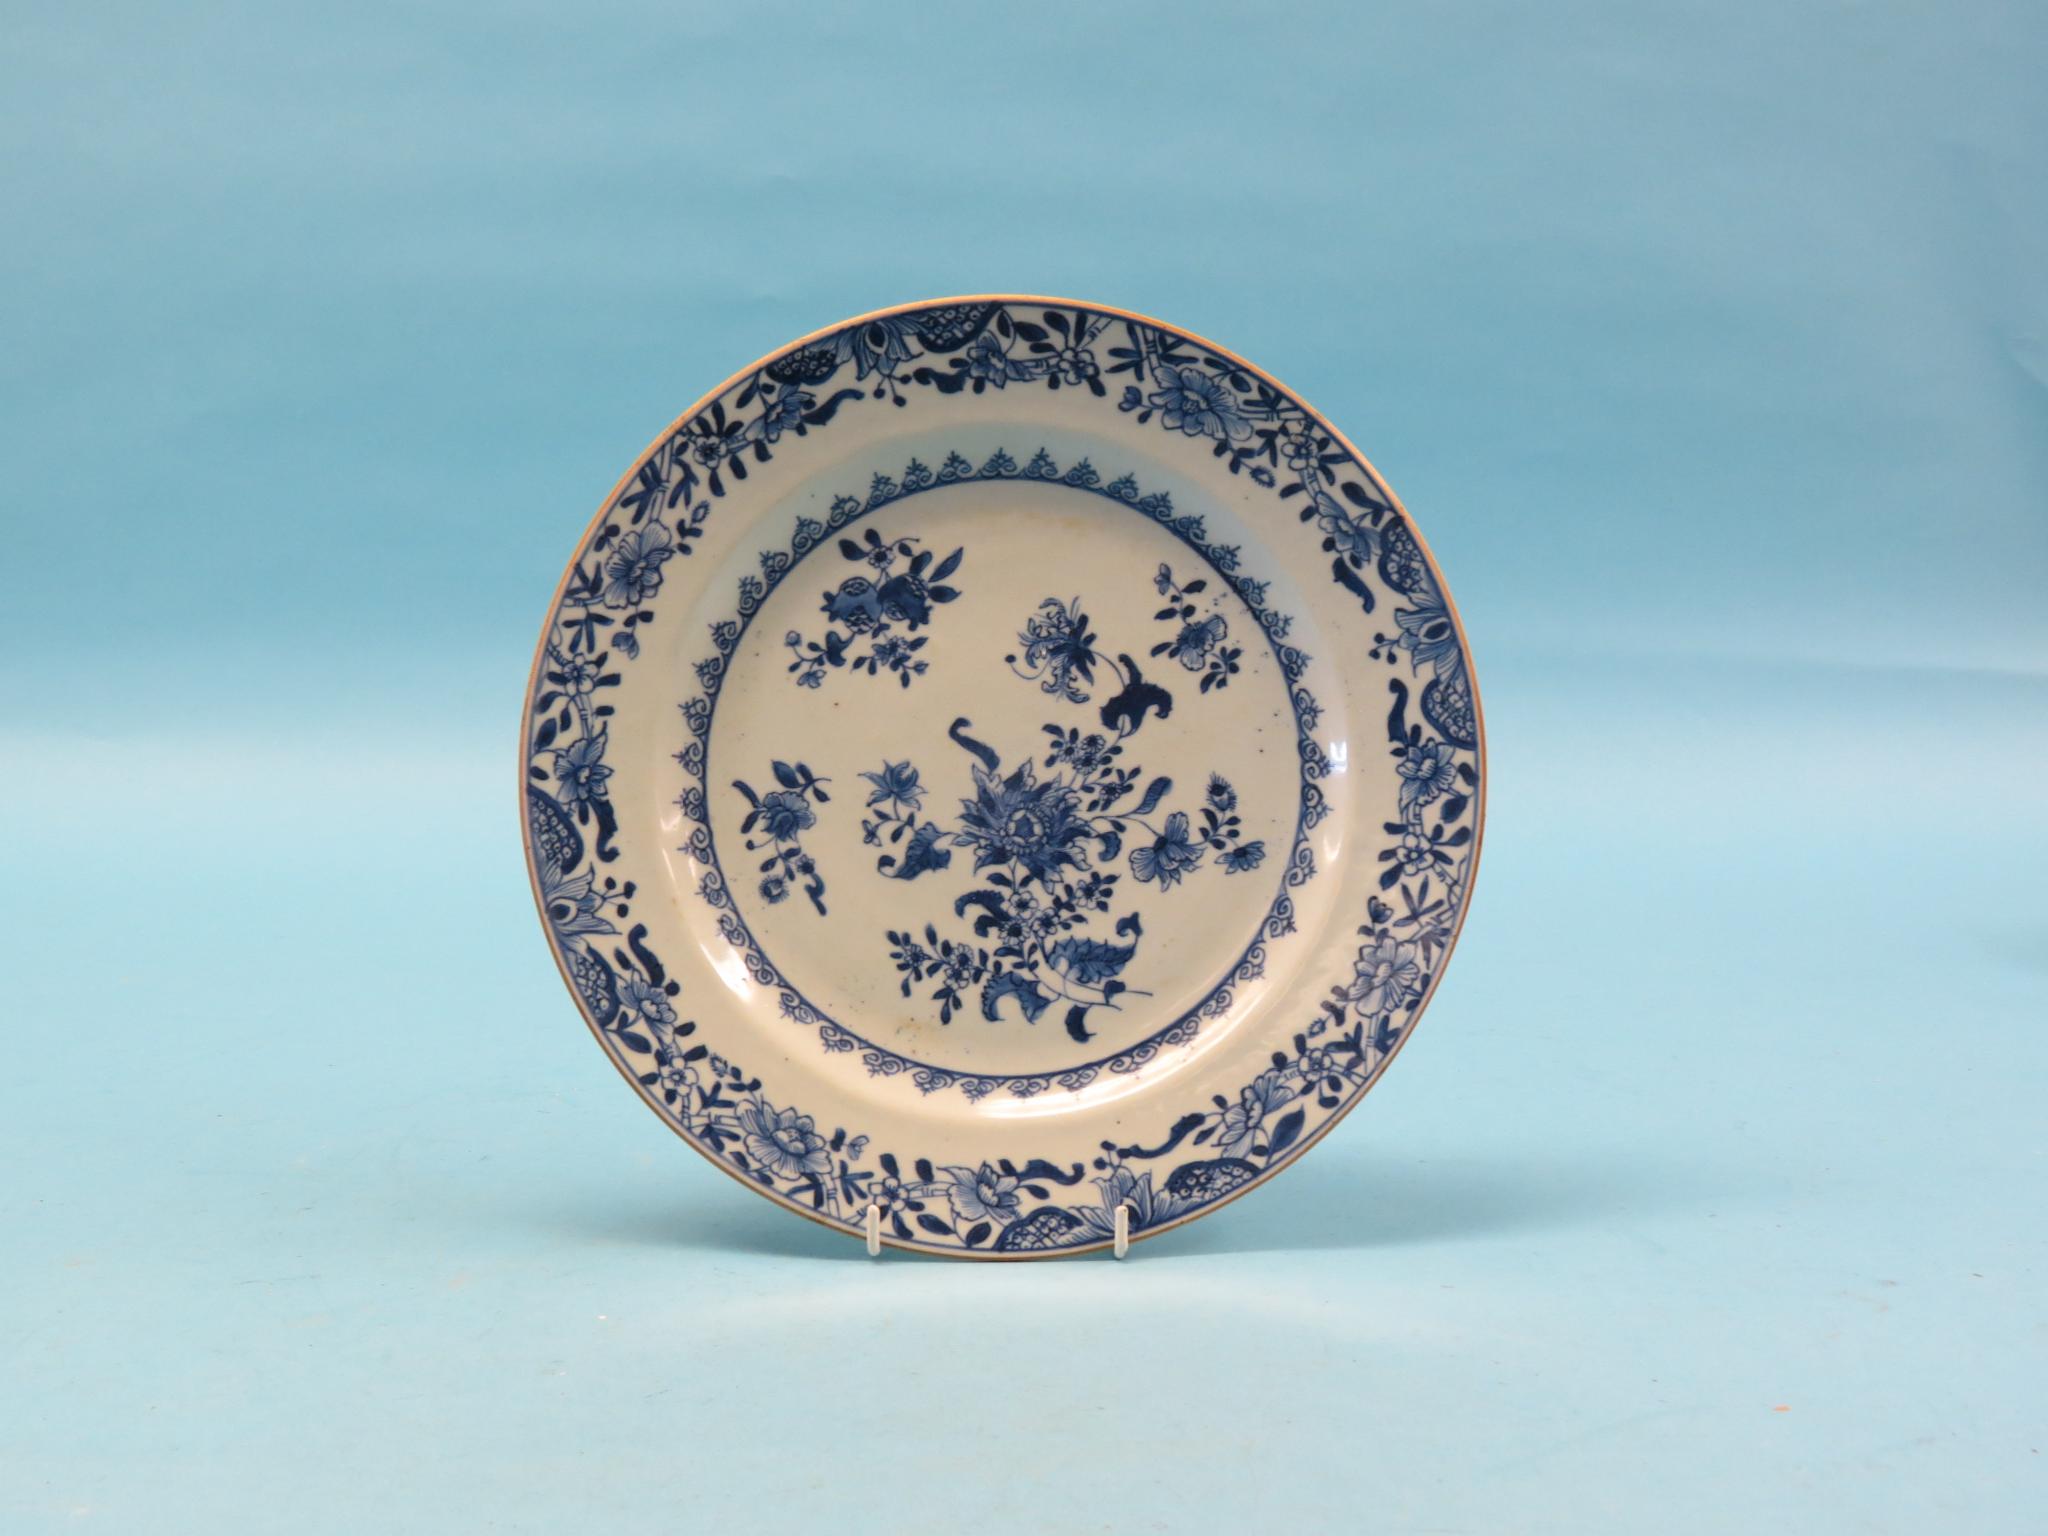 A Chinese export porcelain plate, painted with flowers in blue, 11in.